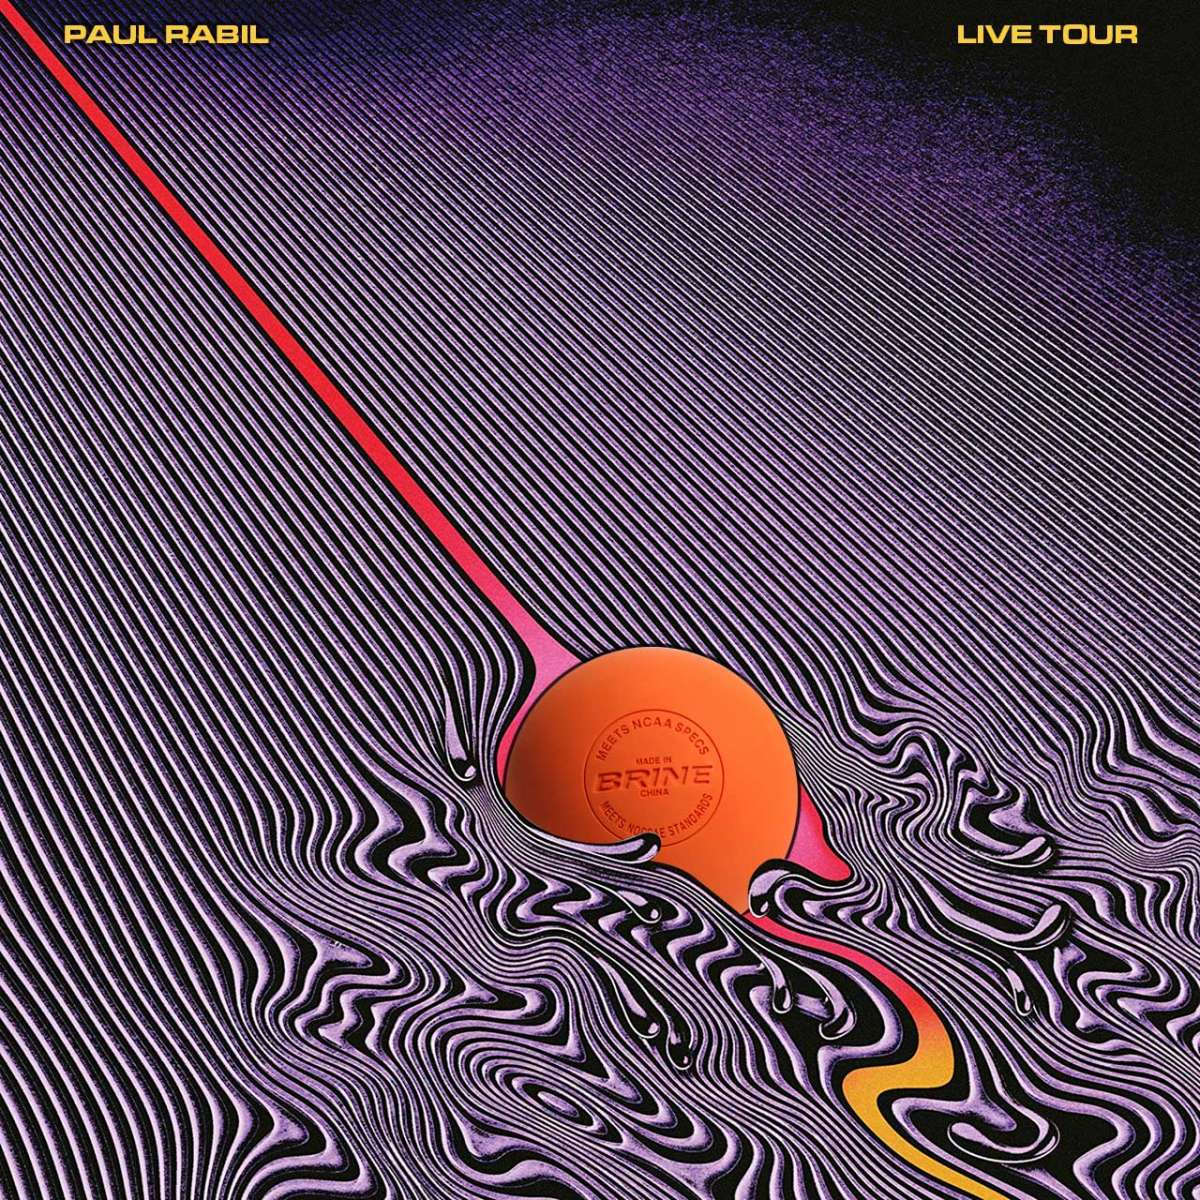 Paul Rabil Live Tour parody of 'Currents' album cover from Tame I...